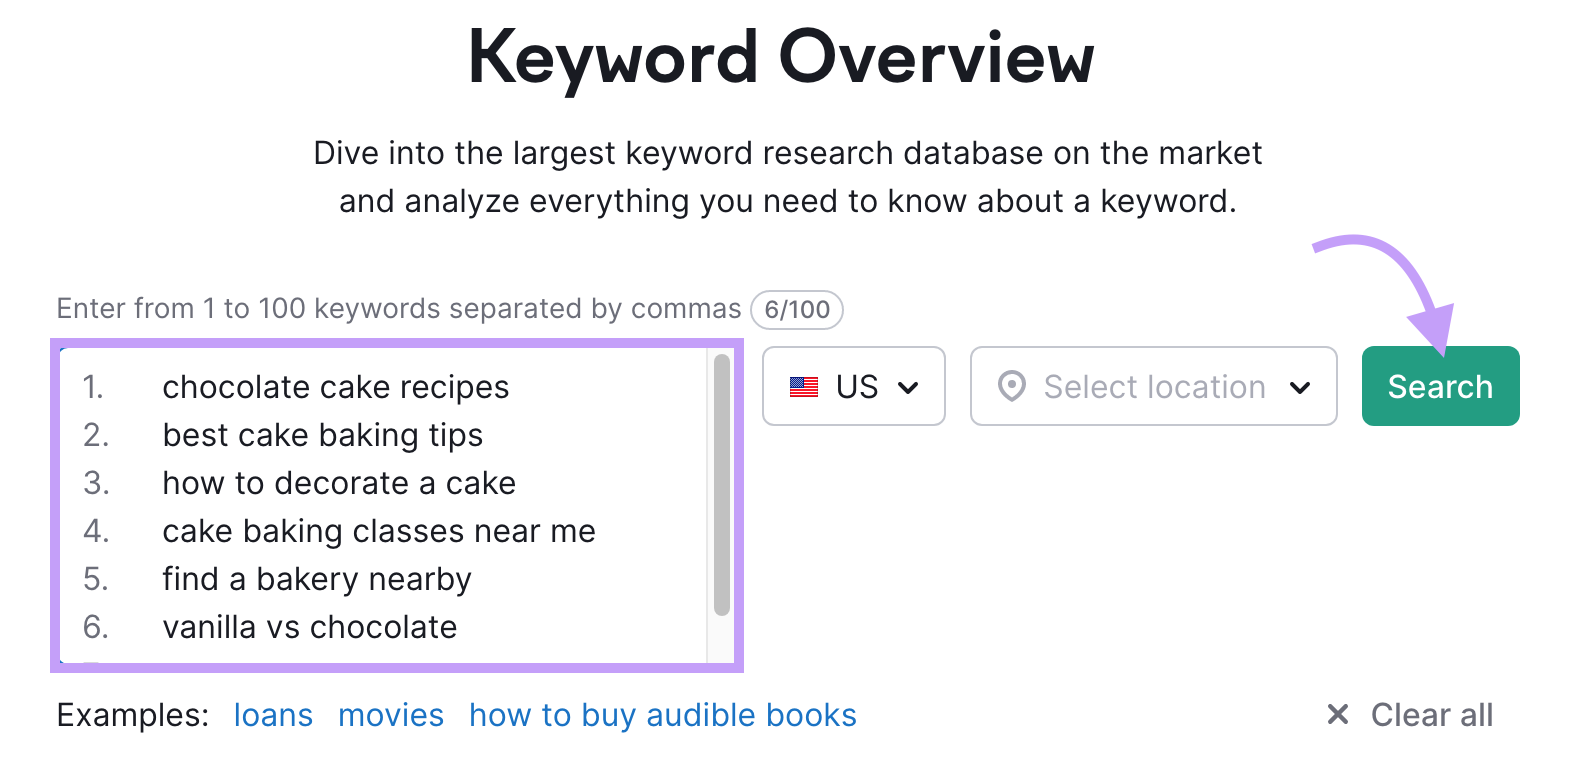 Keyword Overview tool search